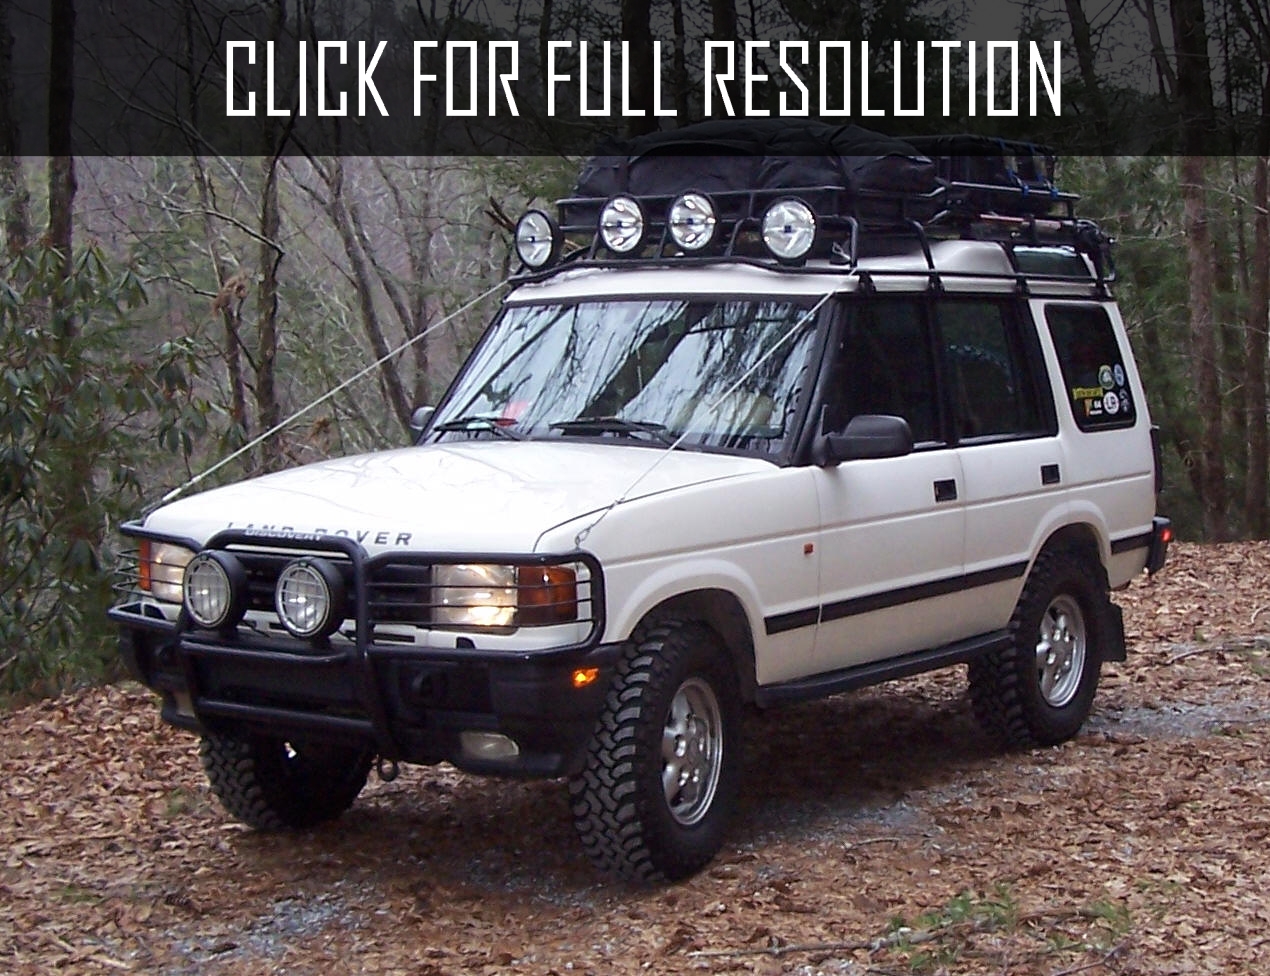 1996 Land Rover Discovery 1 news, reviews, msrp, ratings